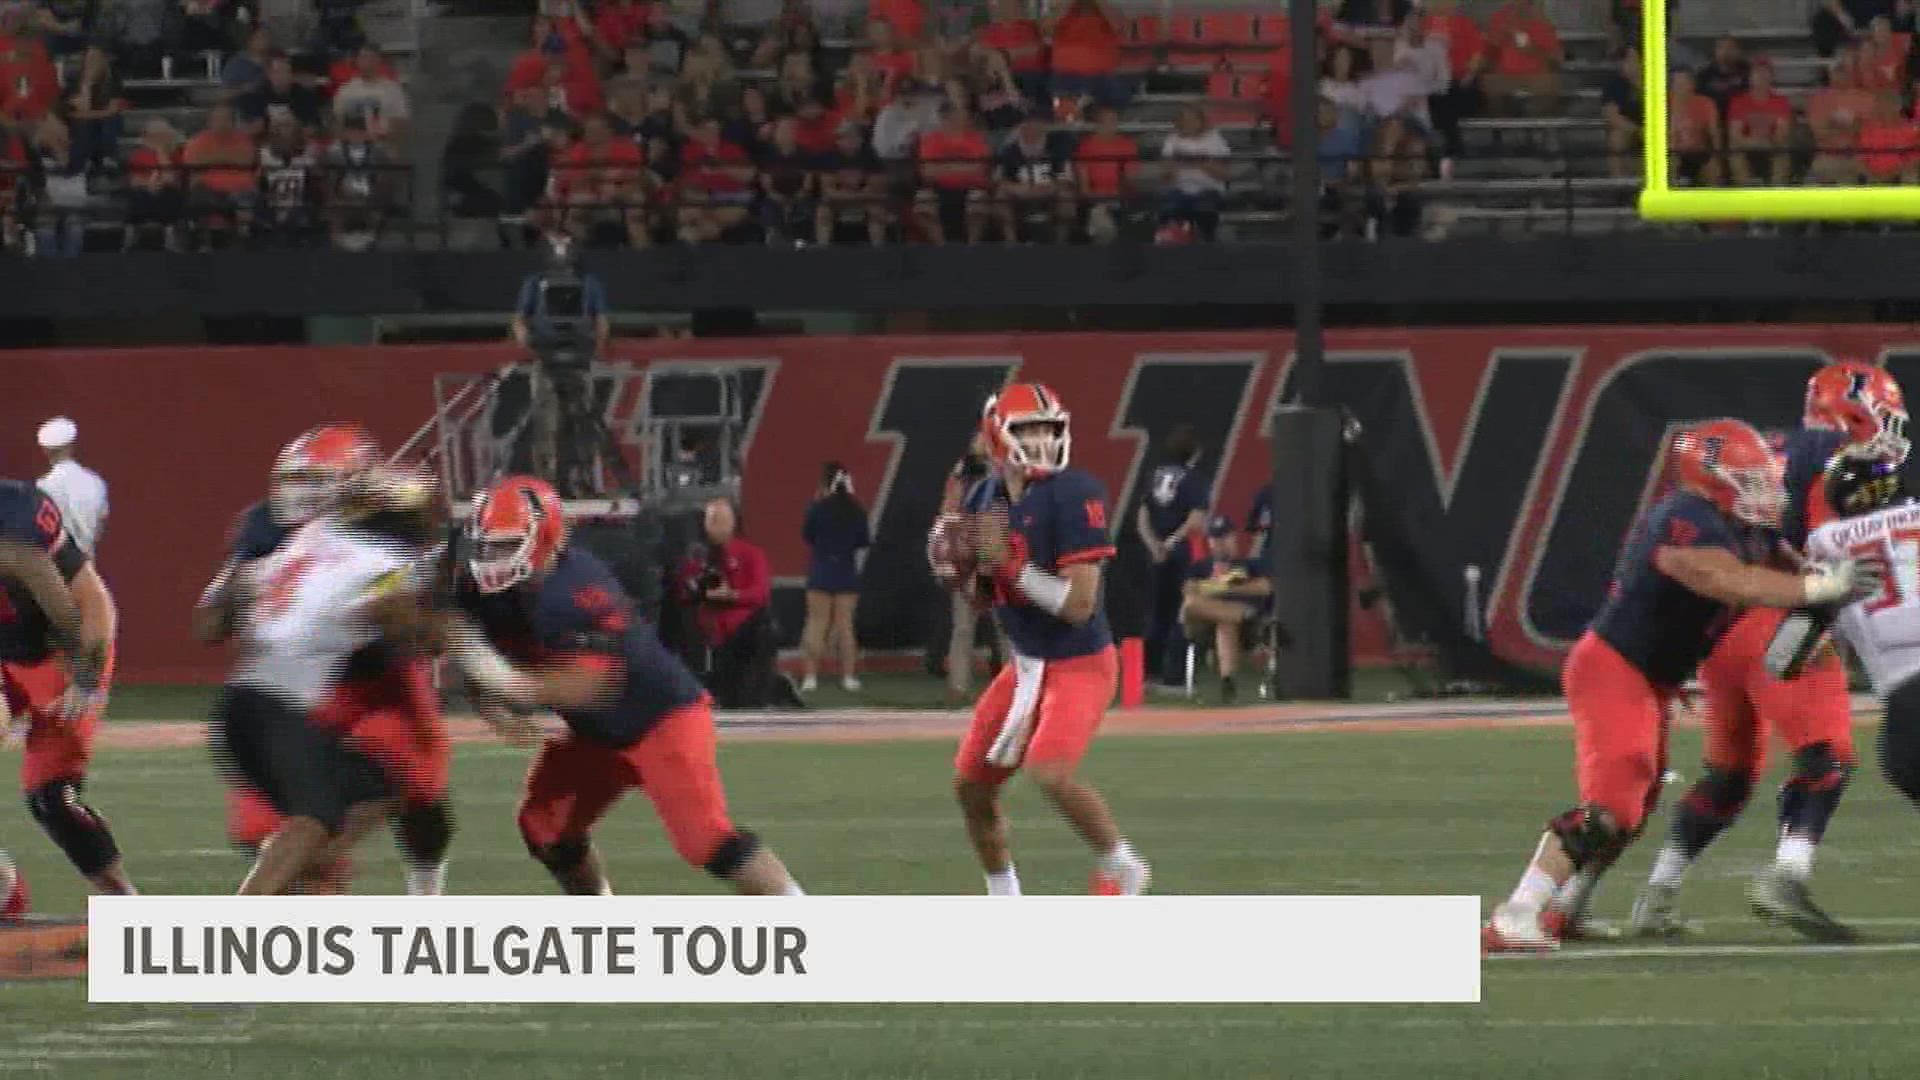 Coaches and players are taking part in the tailgate-themed tour which is free to all fans of the Fighting Illini. The tour stops in the Quad Cities on May 25.